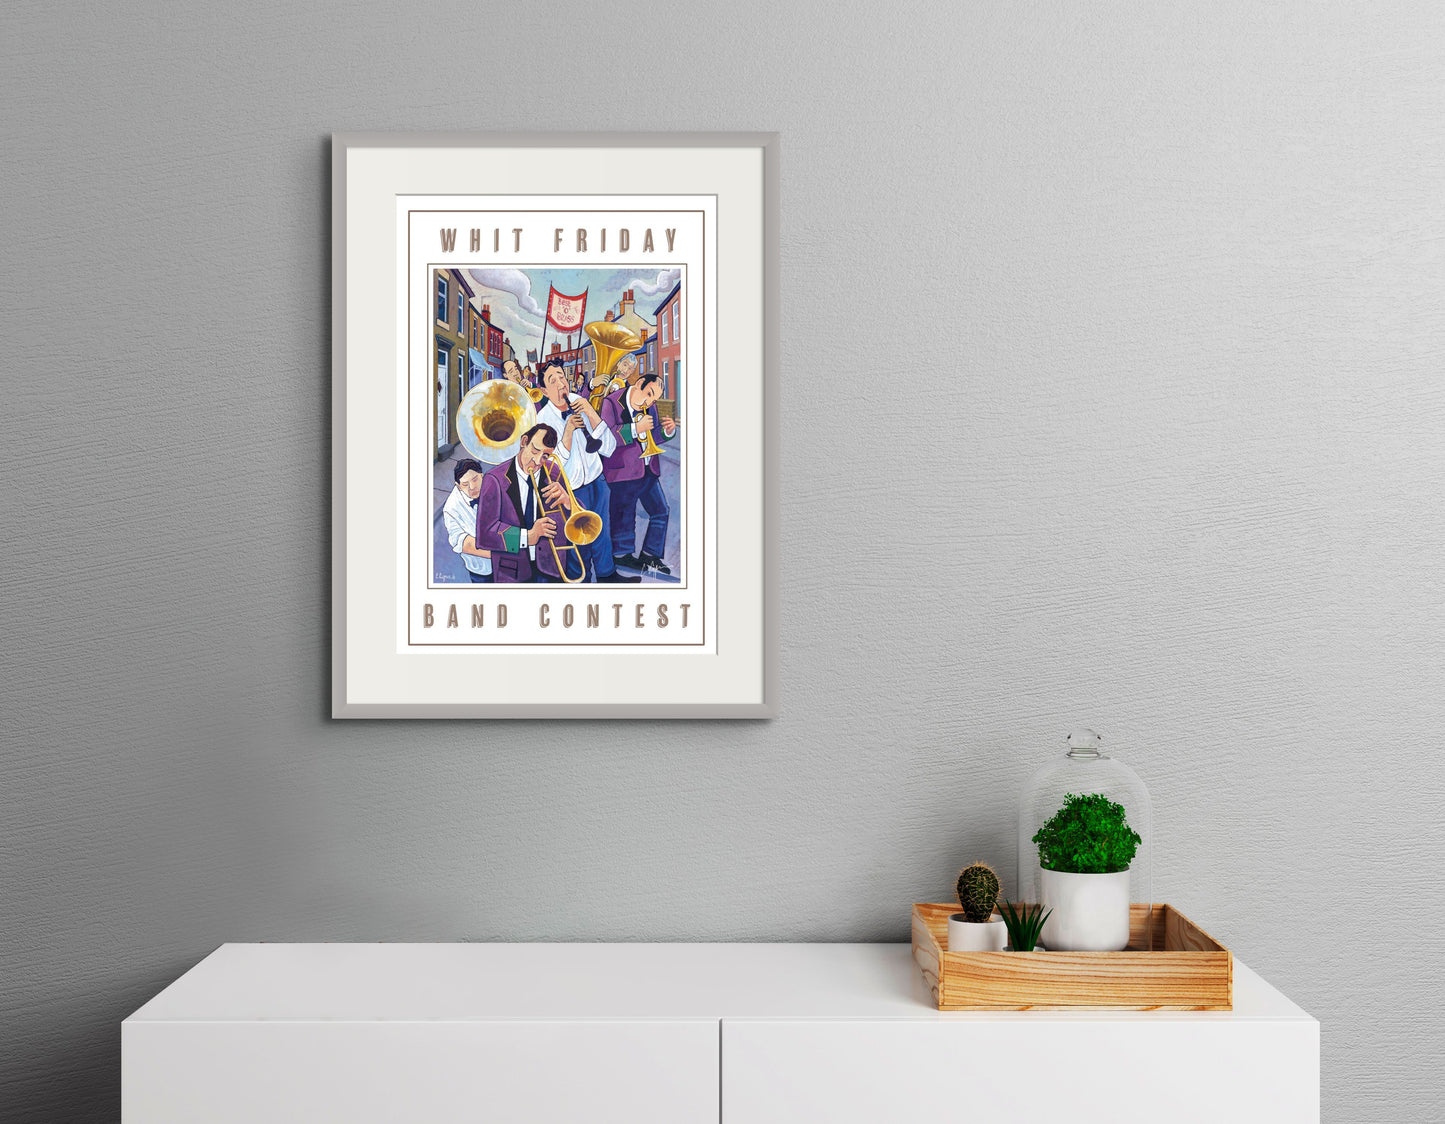 The Whit Friday Band Contest is a long held tradition and has been taking place in the villages of Saddleworth & Tameside since 1884!  Artwork reproduced from painting 'The tourists' 2016      A2 size     Printed on 250gsm silk board paper - sustainably sourced     Tube rolled ideal for worldwide shipping. The image shows the poster framed and displayed 